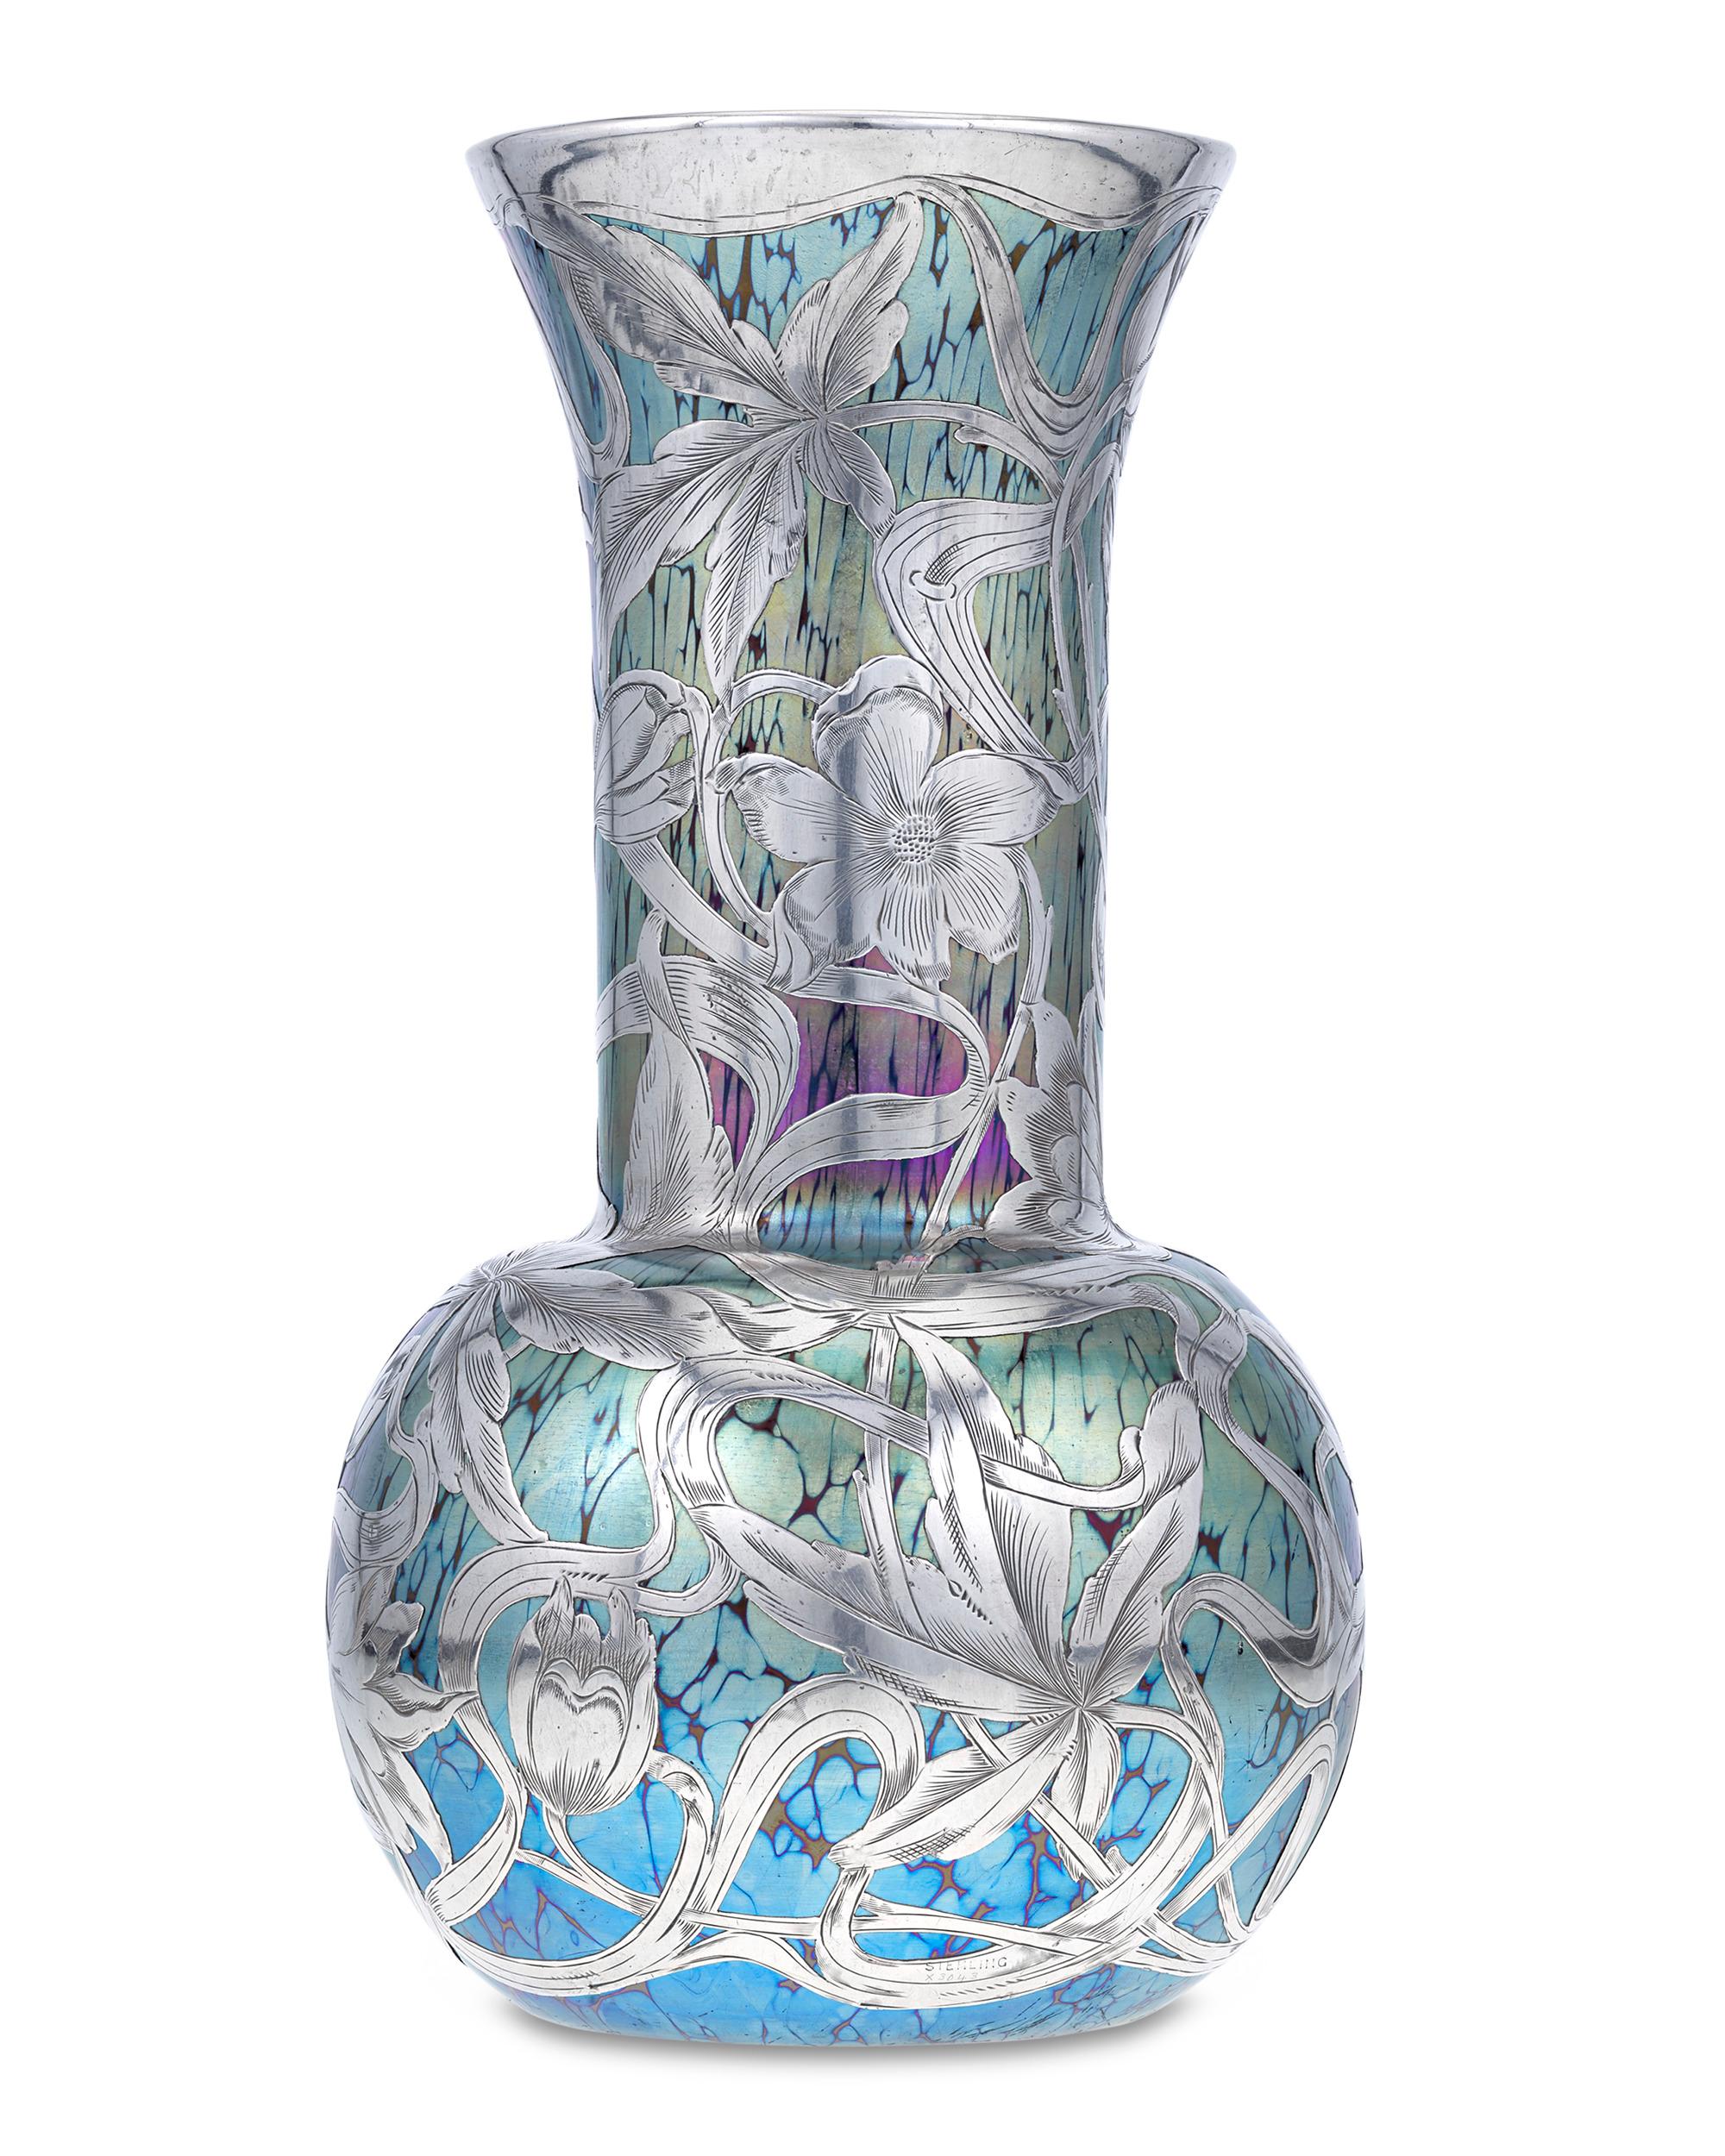 A paragon of Bohemian art glass artistry, this rare Loetz vase combines the beauty of the firm's jewel-toned glass with the brilliance of silver. The blue, green and purple glass features a stunning iridescent marble effect seen in Loetz's most